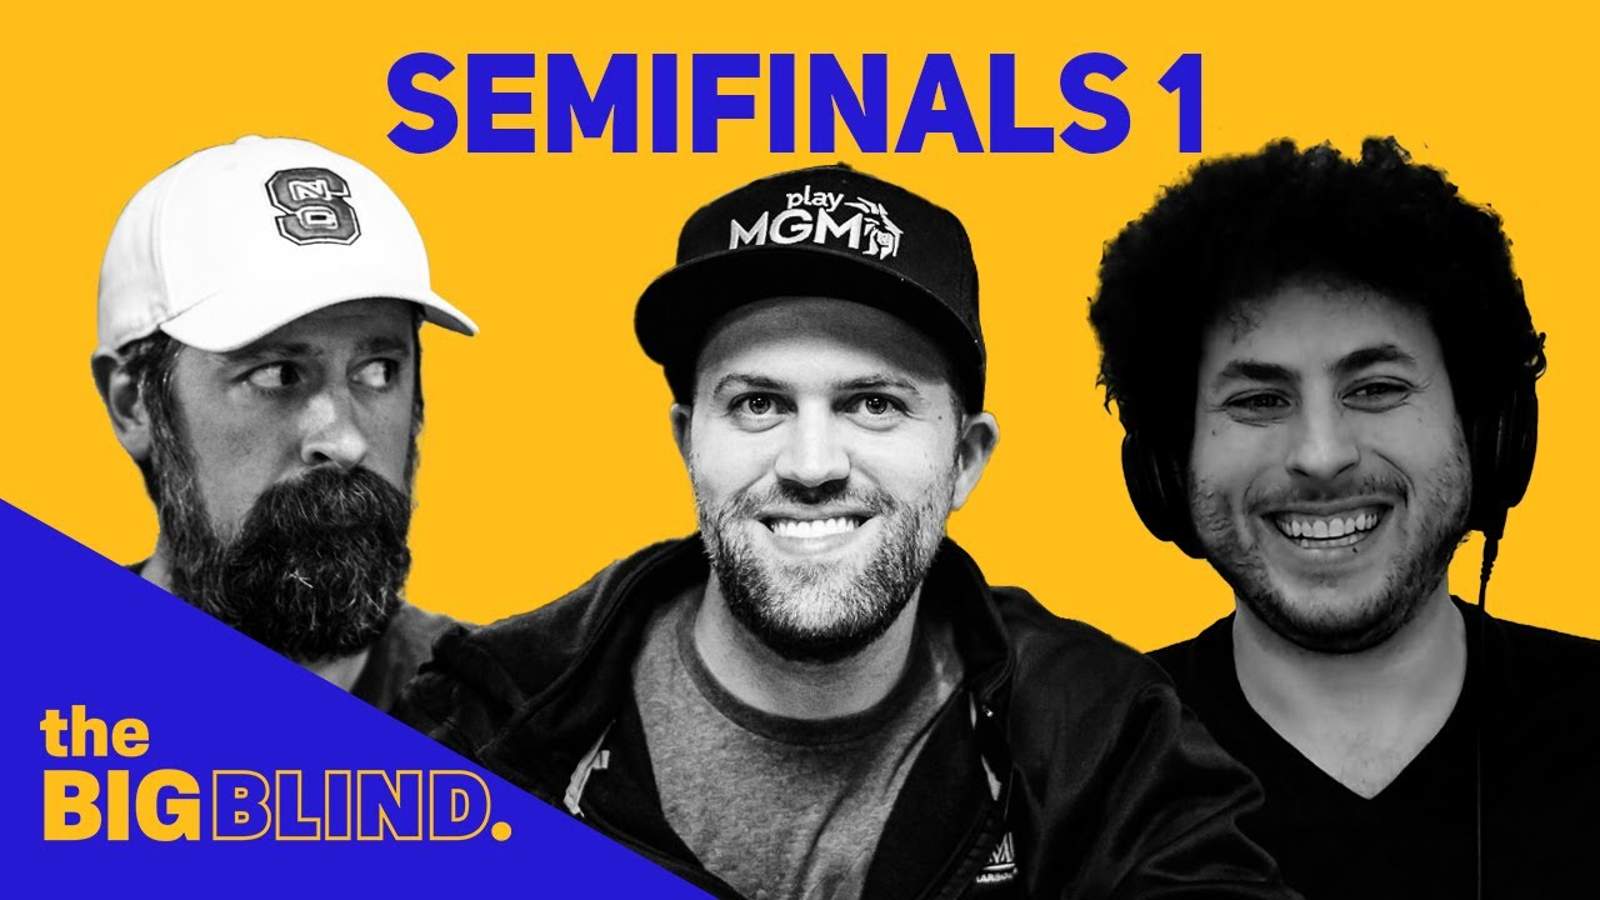 Rewatch Semifinals - Game 1 of The Big Blind on YouTube and Facebook